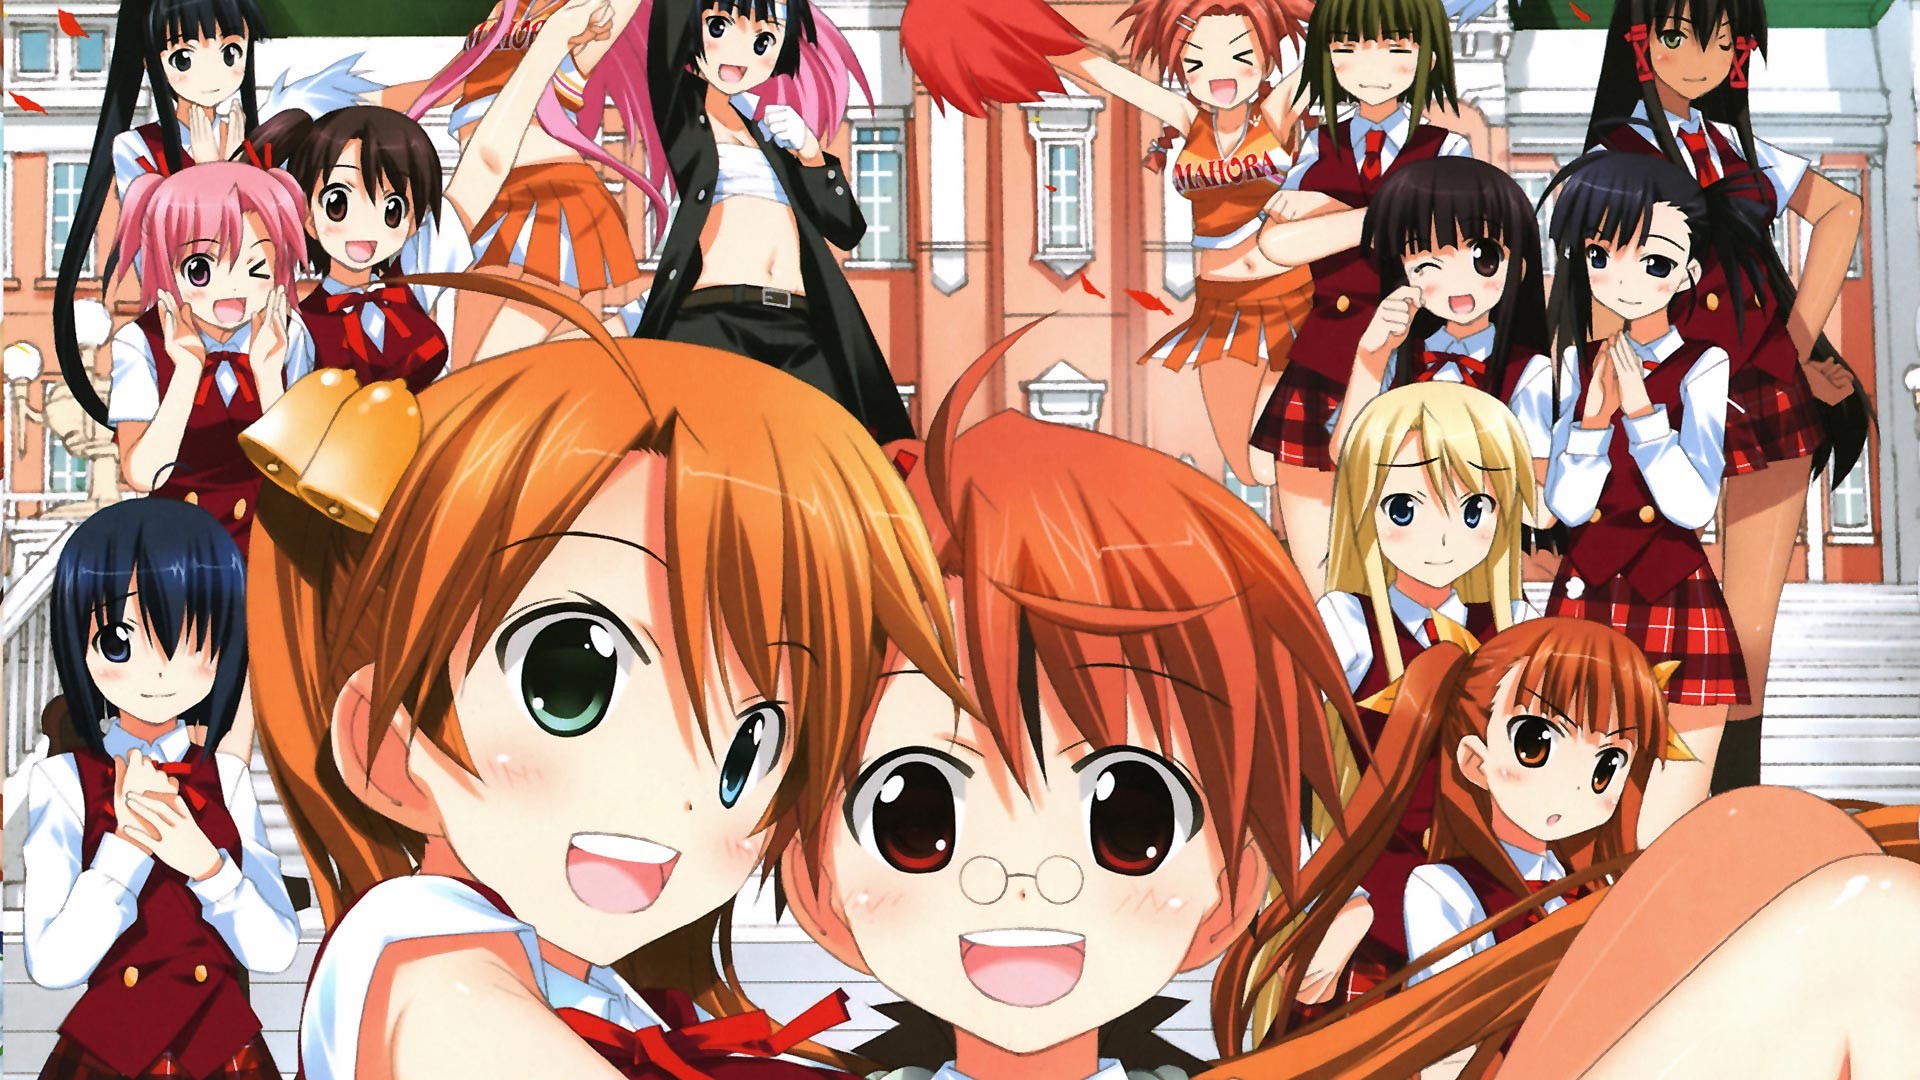 1920x1080 ... series as well as the Negima!? retelling as well as original manga art  plus some cool fan art. A great theme for all fans of the long running  series.